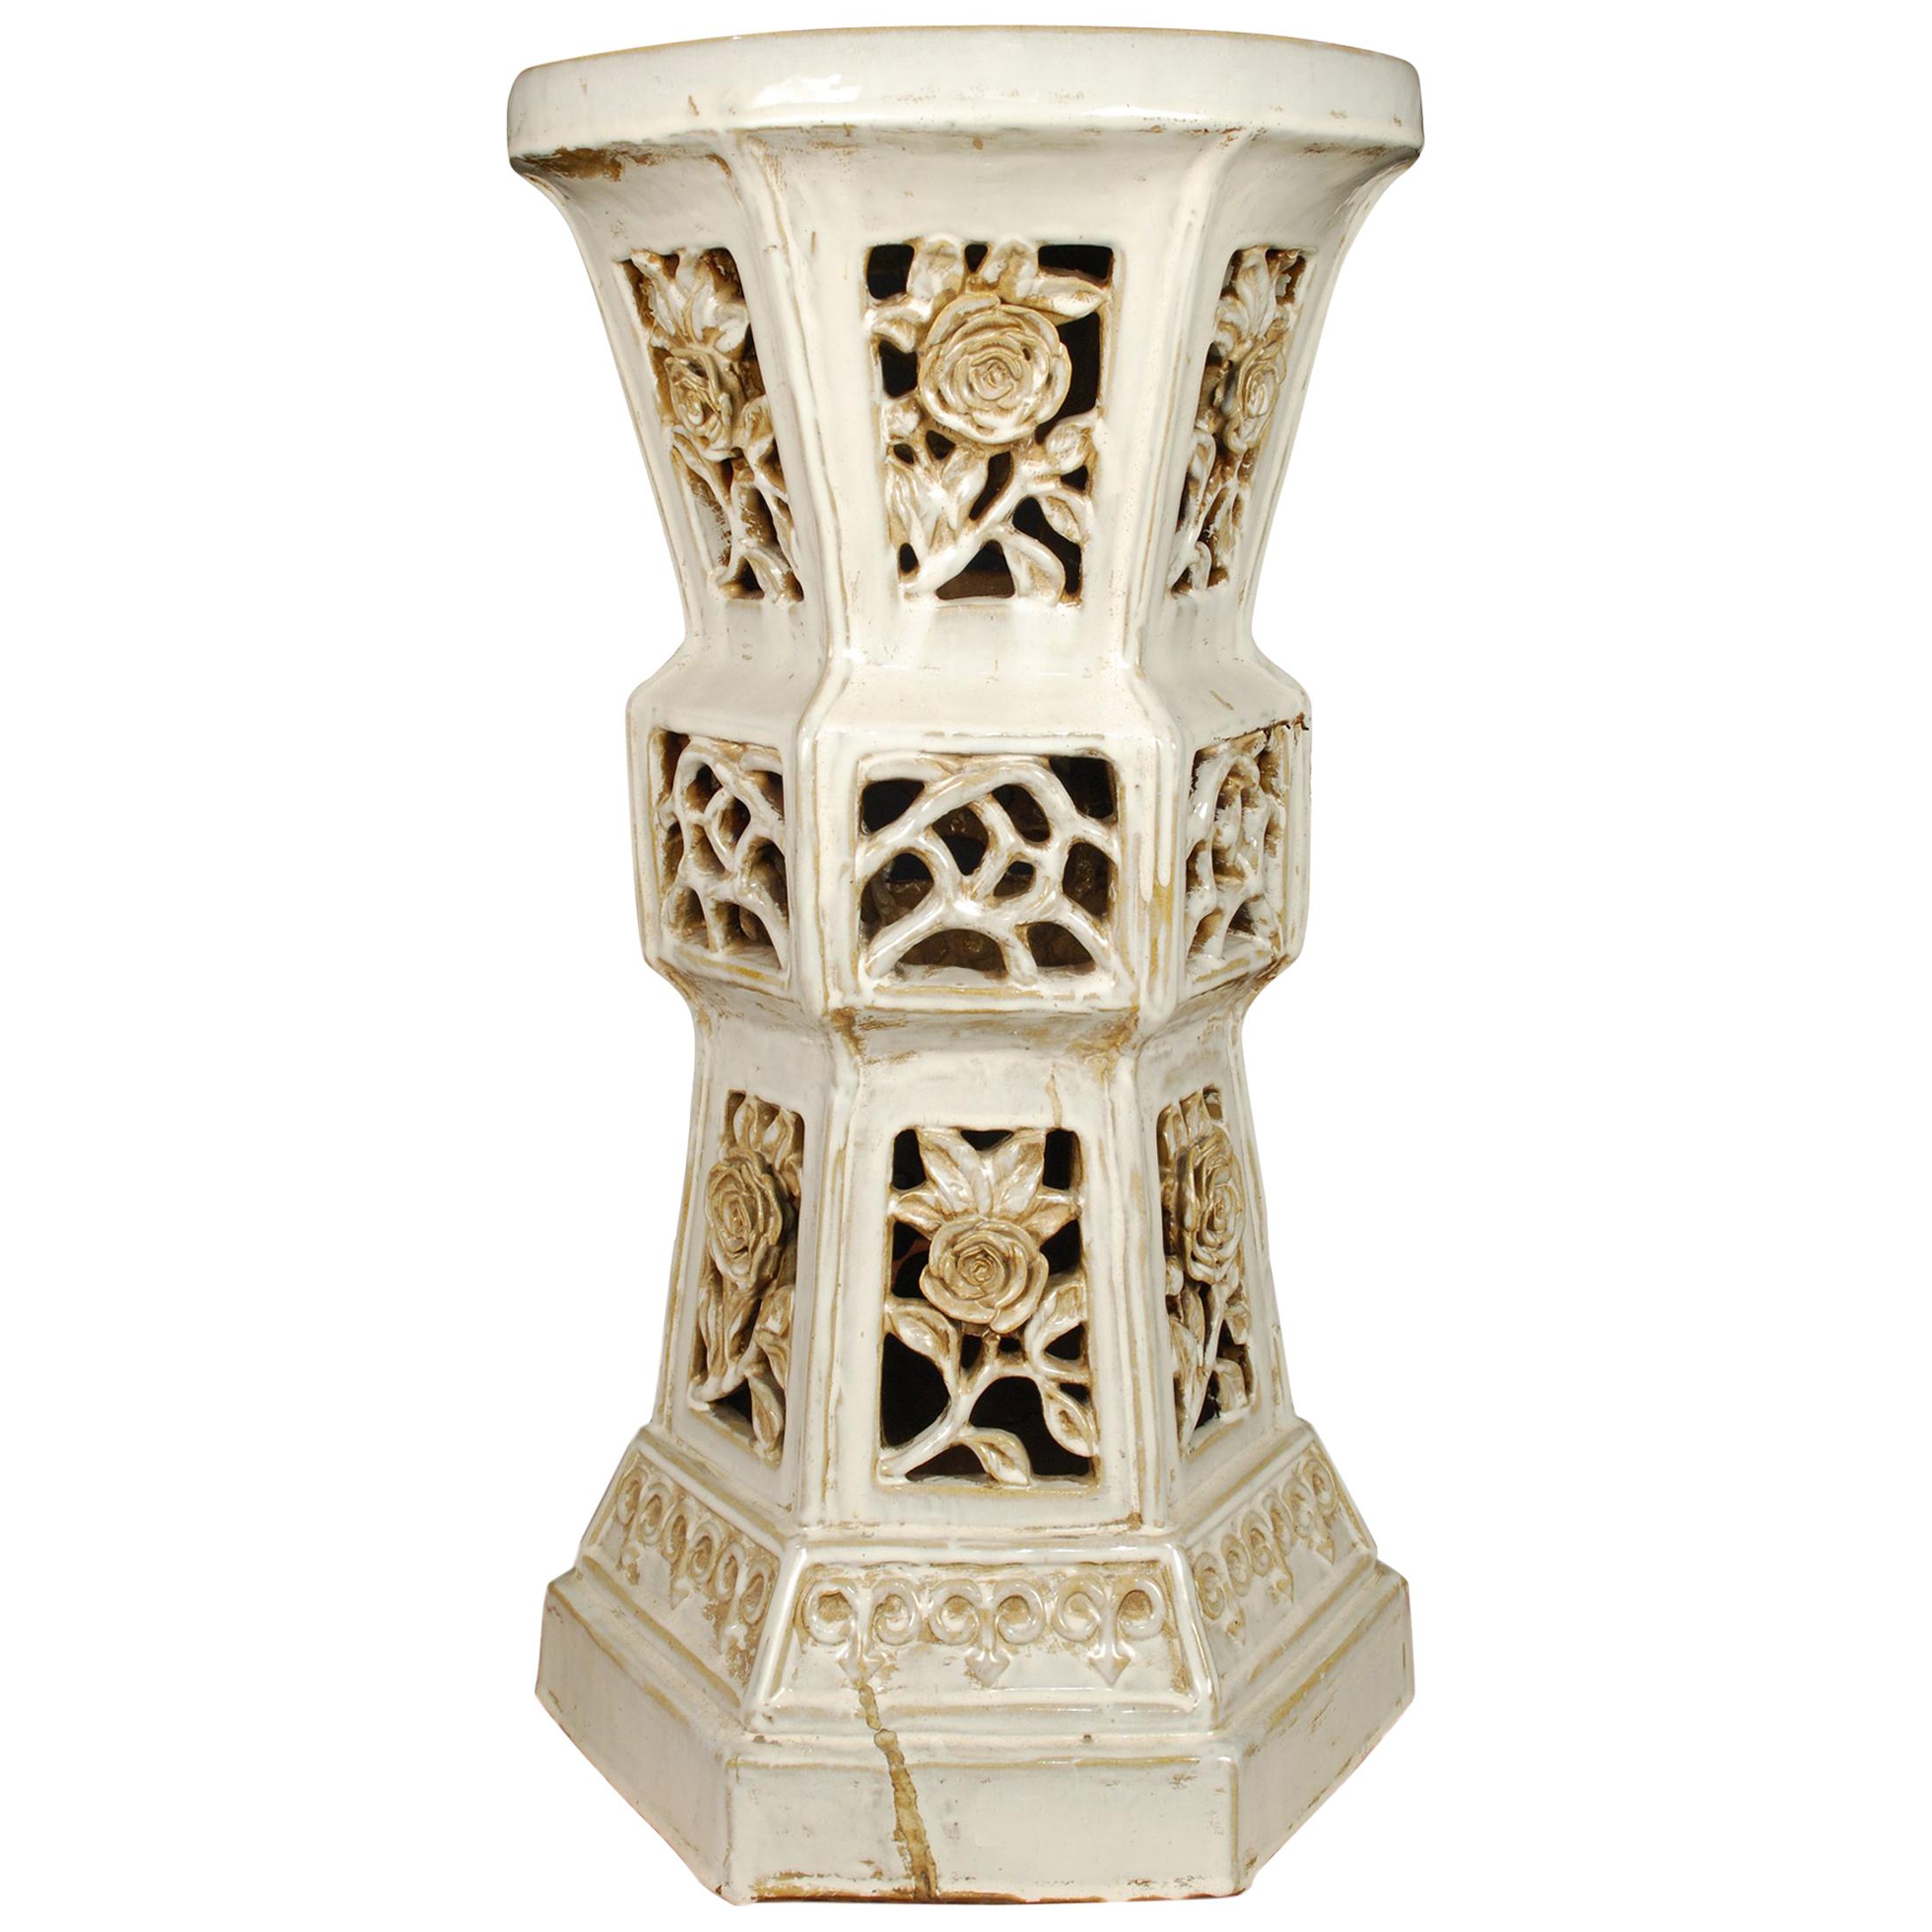 Early 20th Century Chinese Floral Ceramic Pedestal